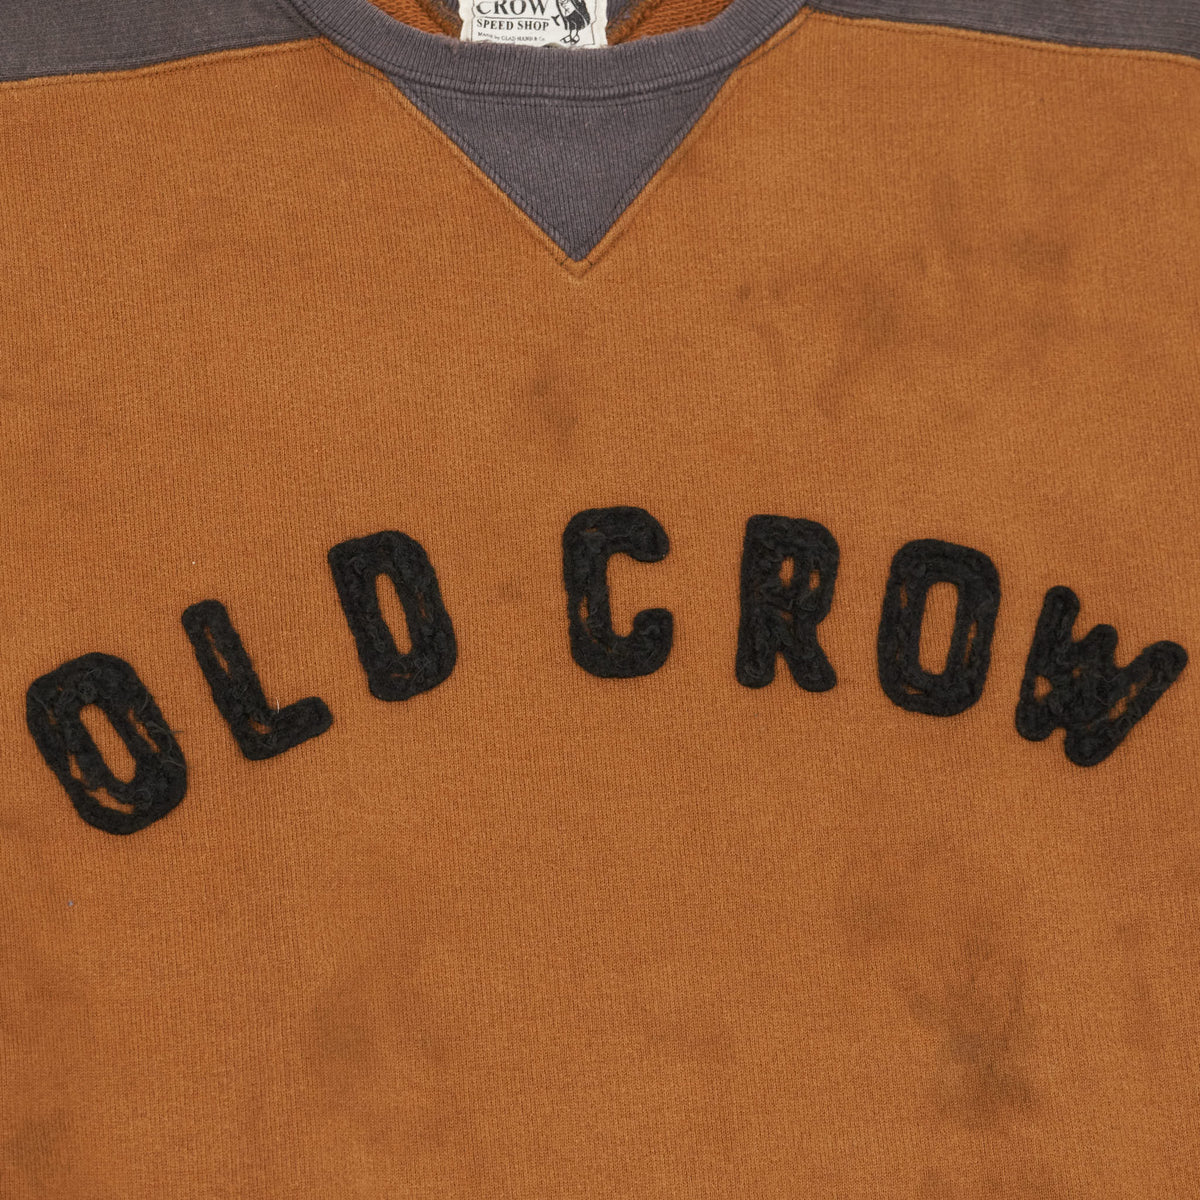 Old Crow Speed Shop by Glad Hand Racers Crew neck Sweat Shirt